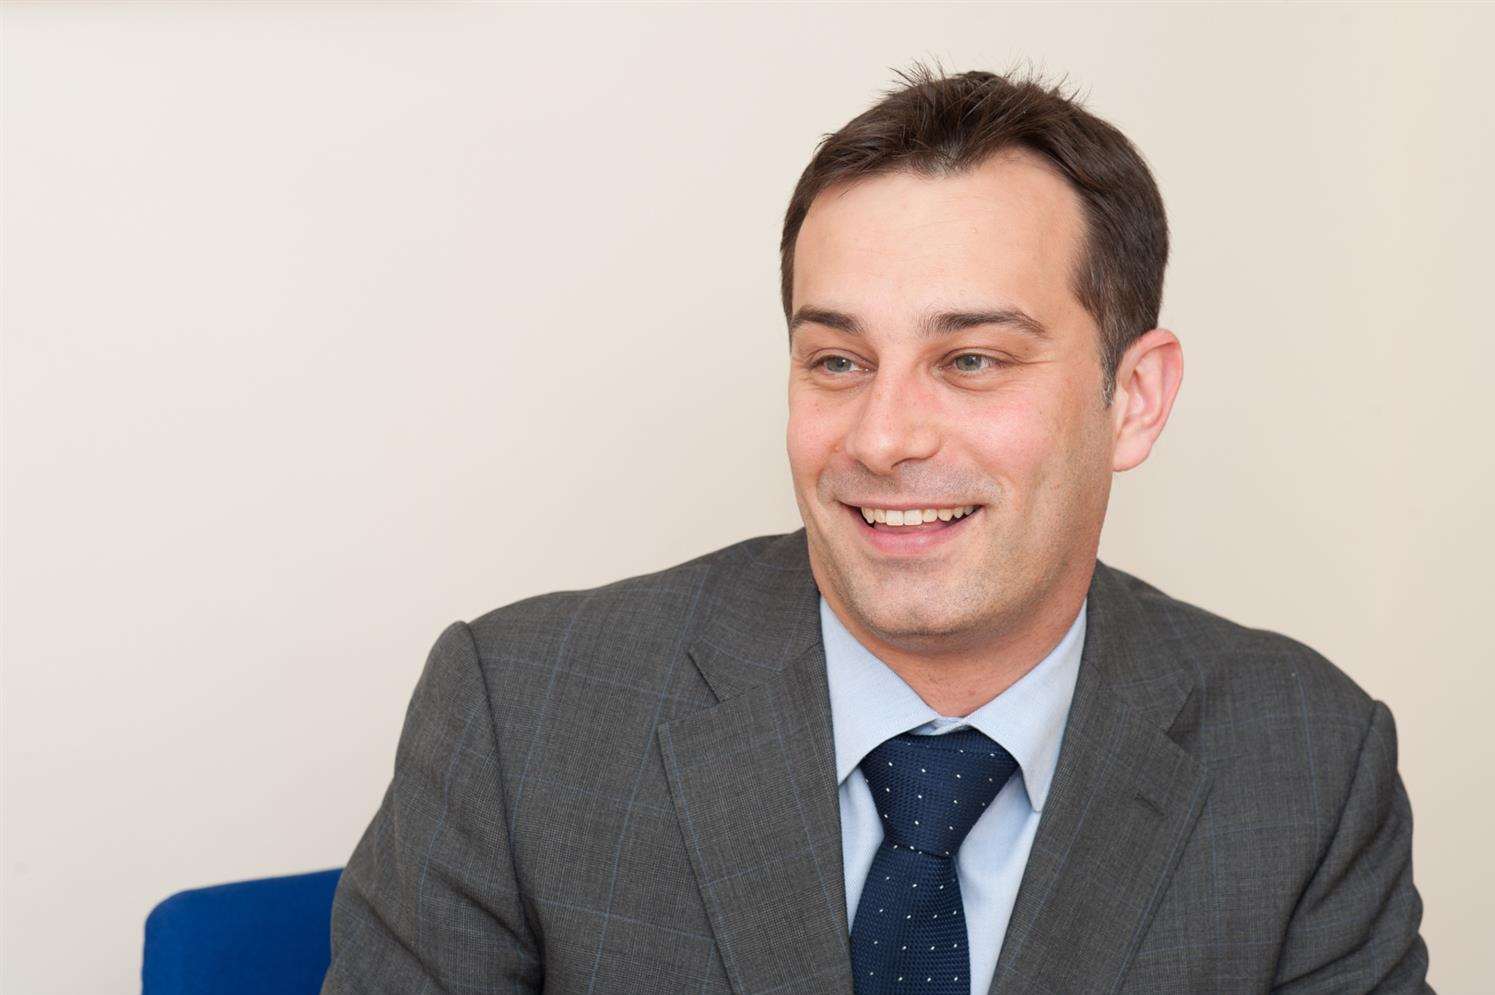 Commercial property specialist Dan Cowley who has joined the Canterbury branch as associate solicitor